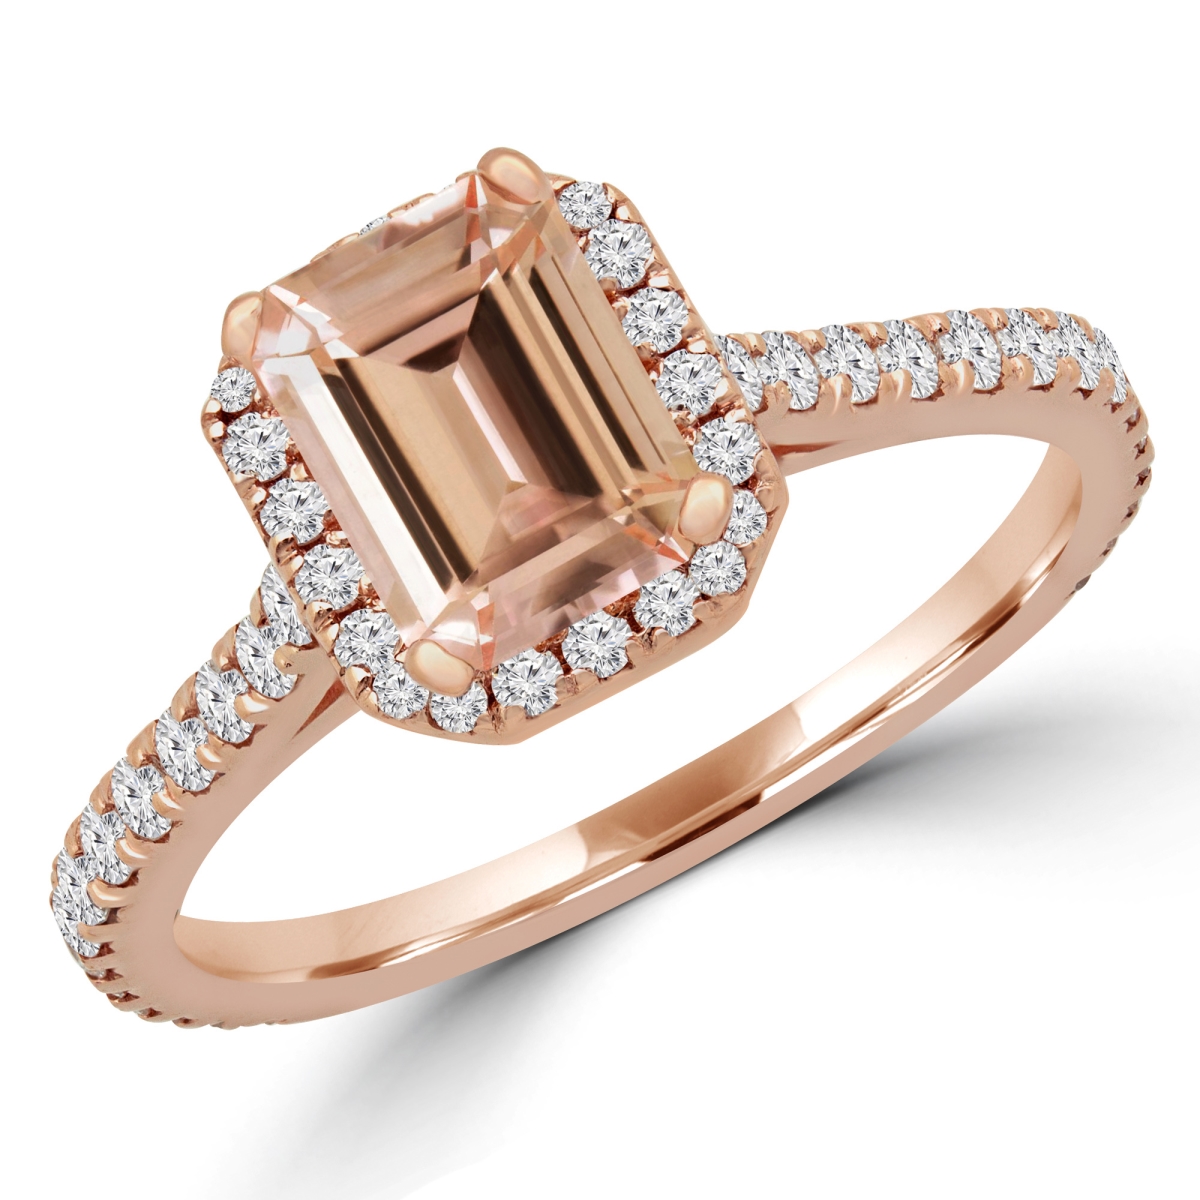 Picture of Majesty Diamonds MD180580-7.5 1.25 CTW Emerald Pink Morganite Halo Engagement Ring in 14K Rose Gold - Size 7.5